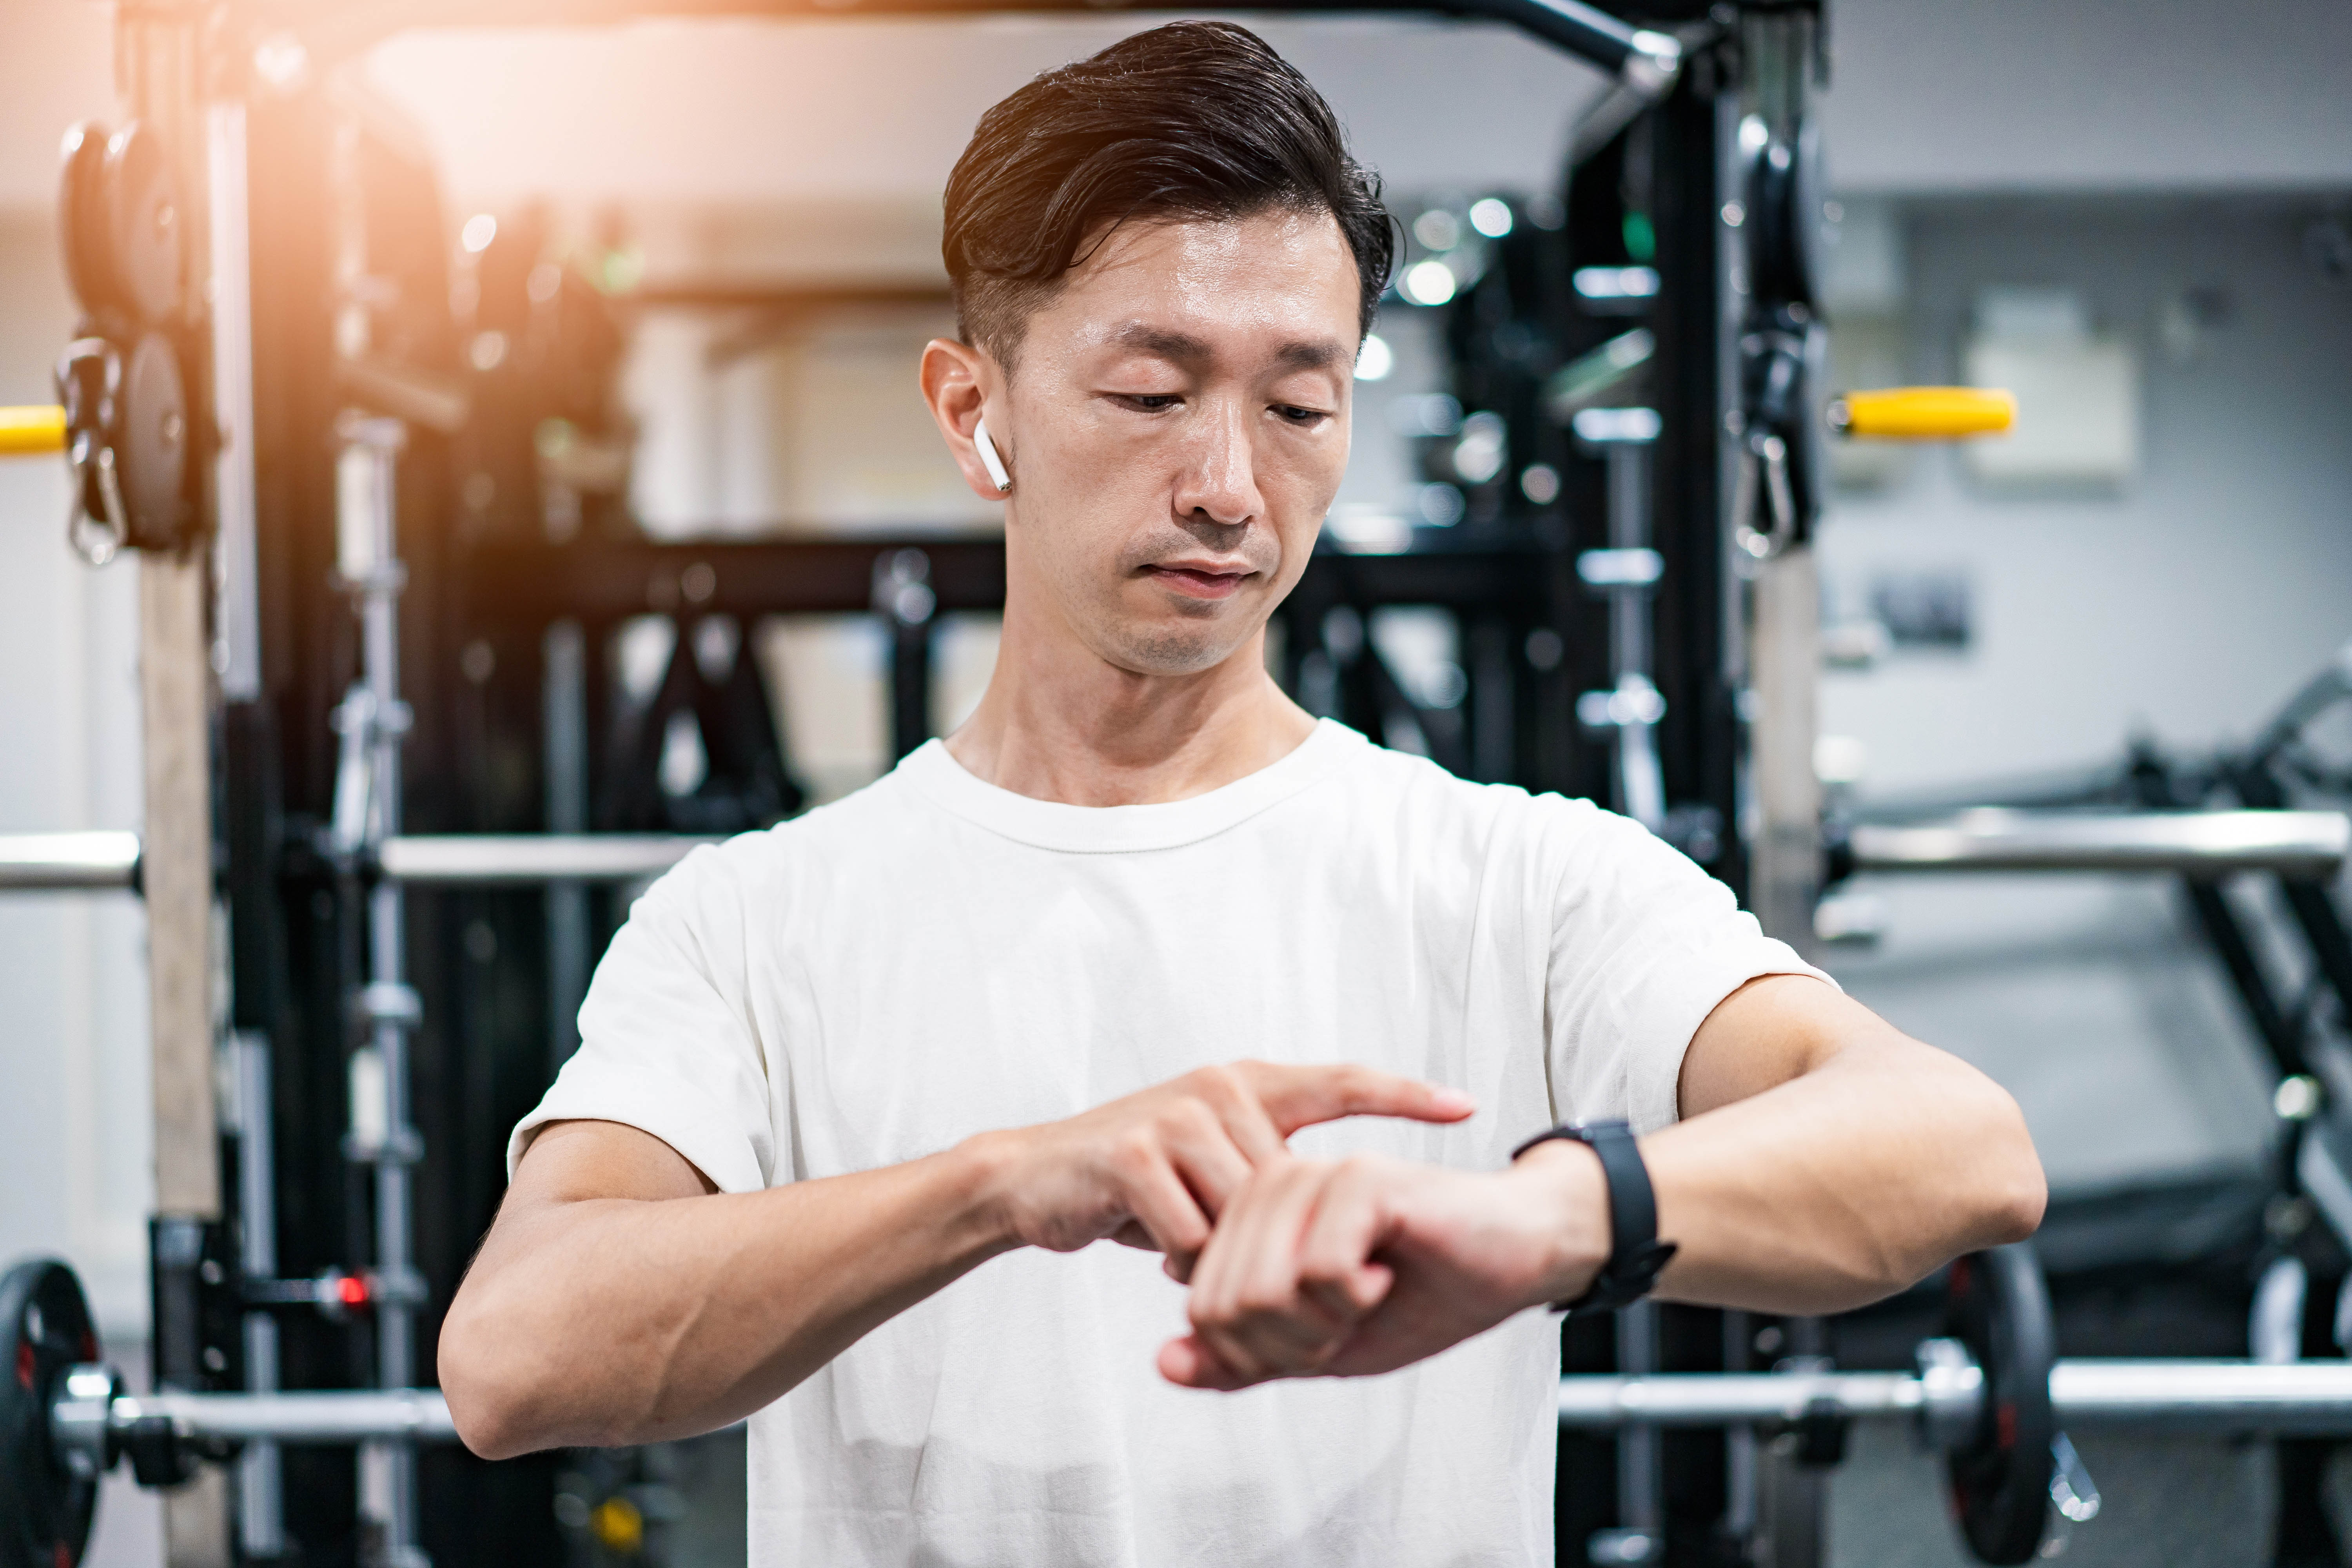 Middle aged Asian man in the gym checking his smart watch. He also has his headphones in.